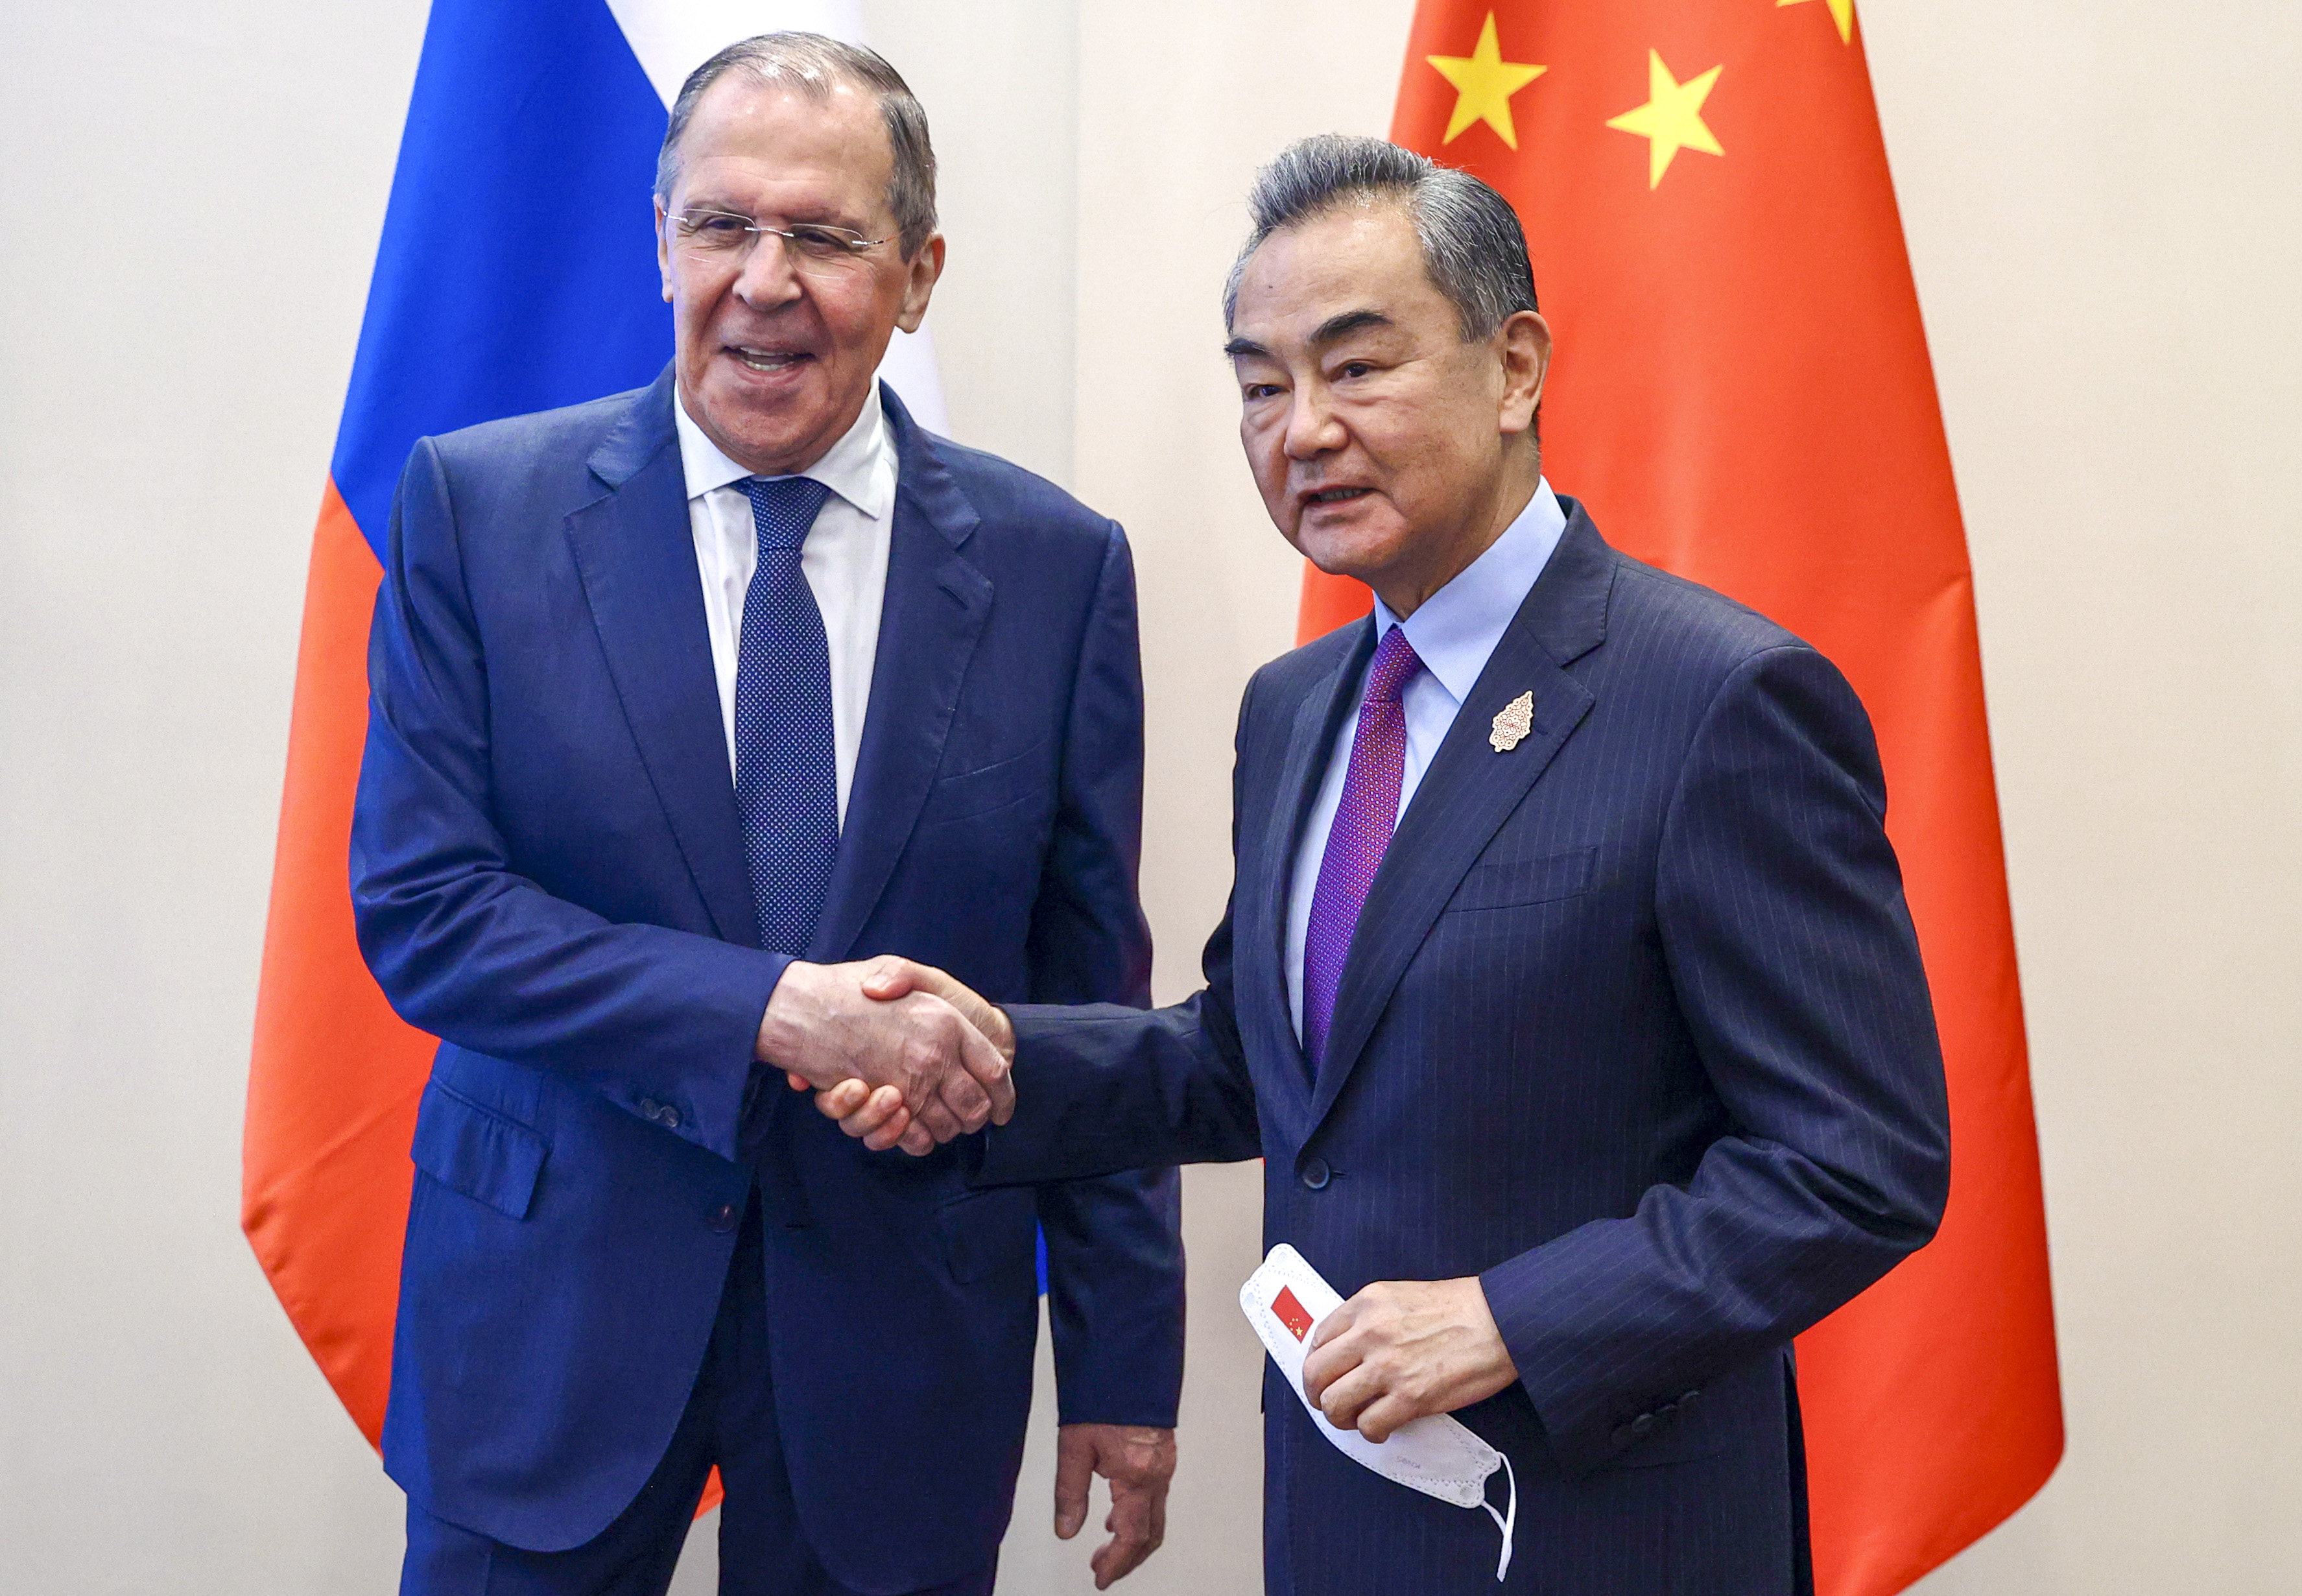 Russian Foreign Minister Sergey Lavrov (left) and his Chinese counterpart Wang Yi discussed the Israel-Gaza conflict and other issues in a phone call on Wednesday. Photo: EPA-EFE